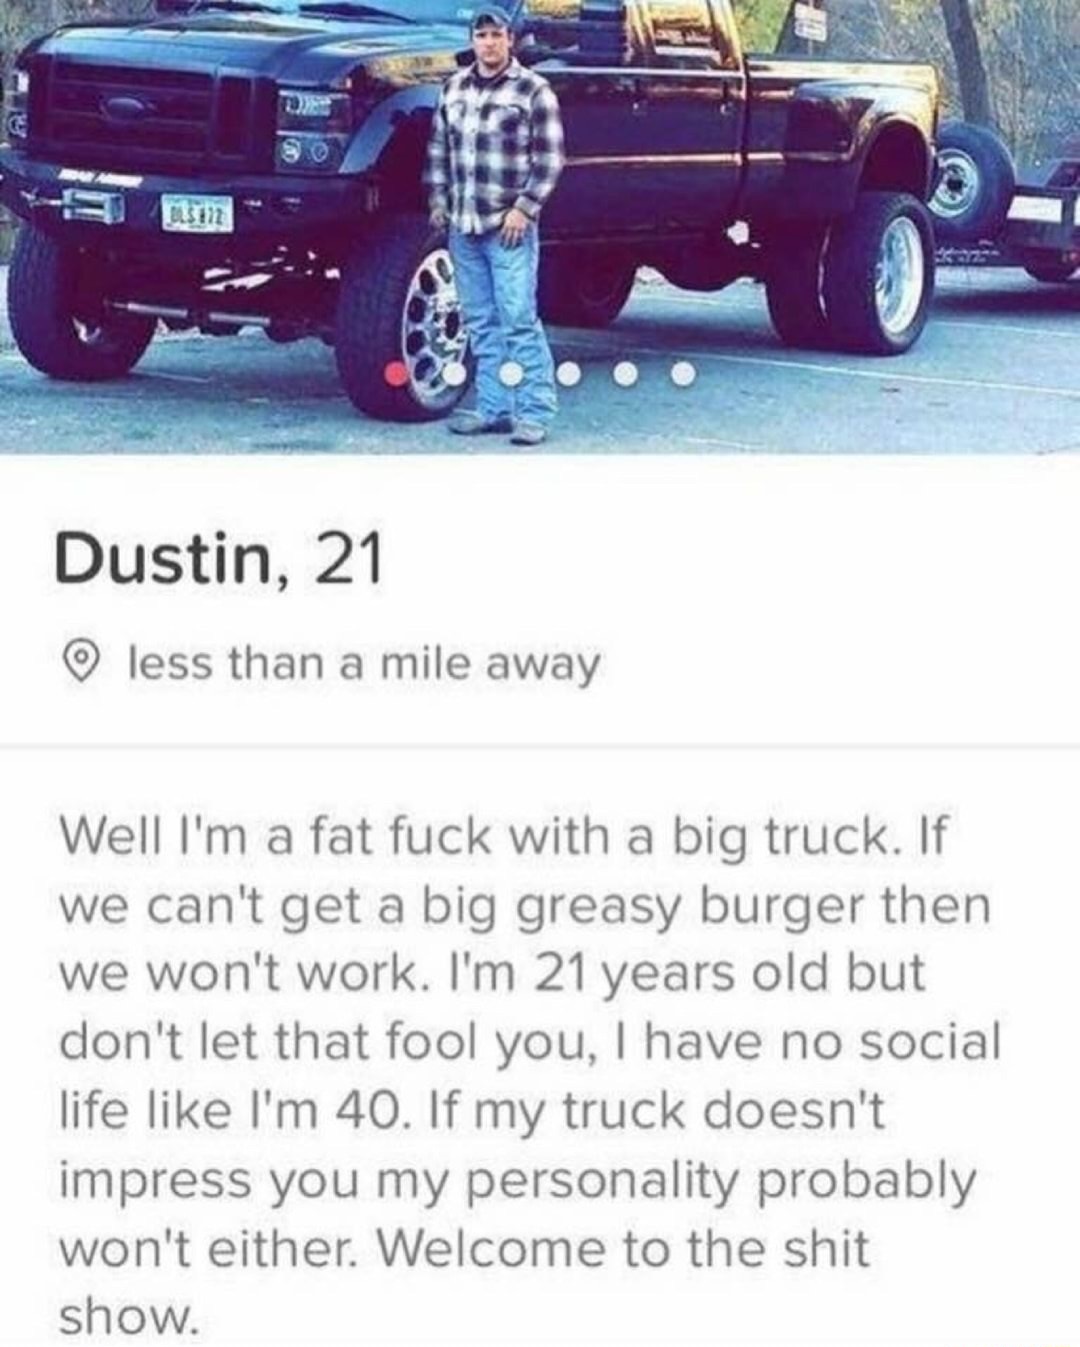 funny meme - tinder truck guy - Dustin, 21 less than a mile away Well I'm a fat fuck with a big truck. If we can't get a big greasy burger then we won't work. I'm 21 years old but don't let that fool you, I have no social life I'm 40. If my truck doesn't 